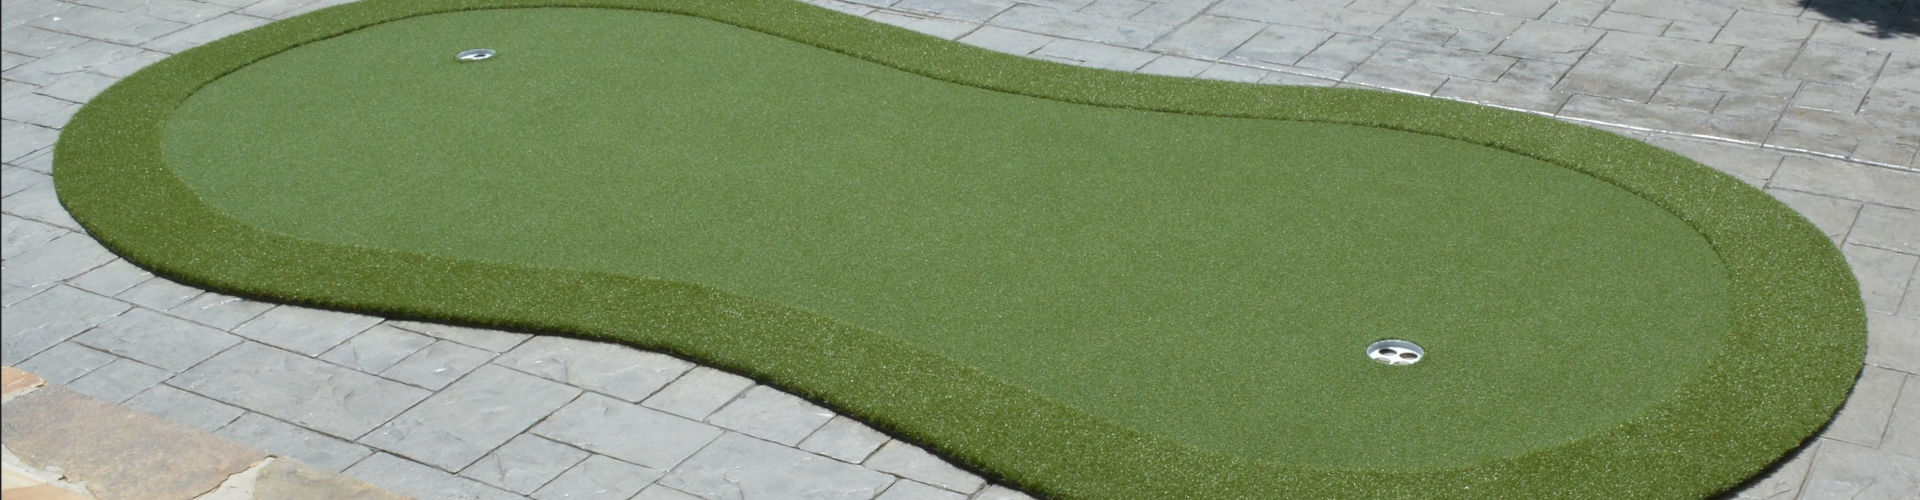 Southwest Greens of Illinois Portable Putting Green